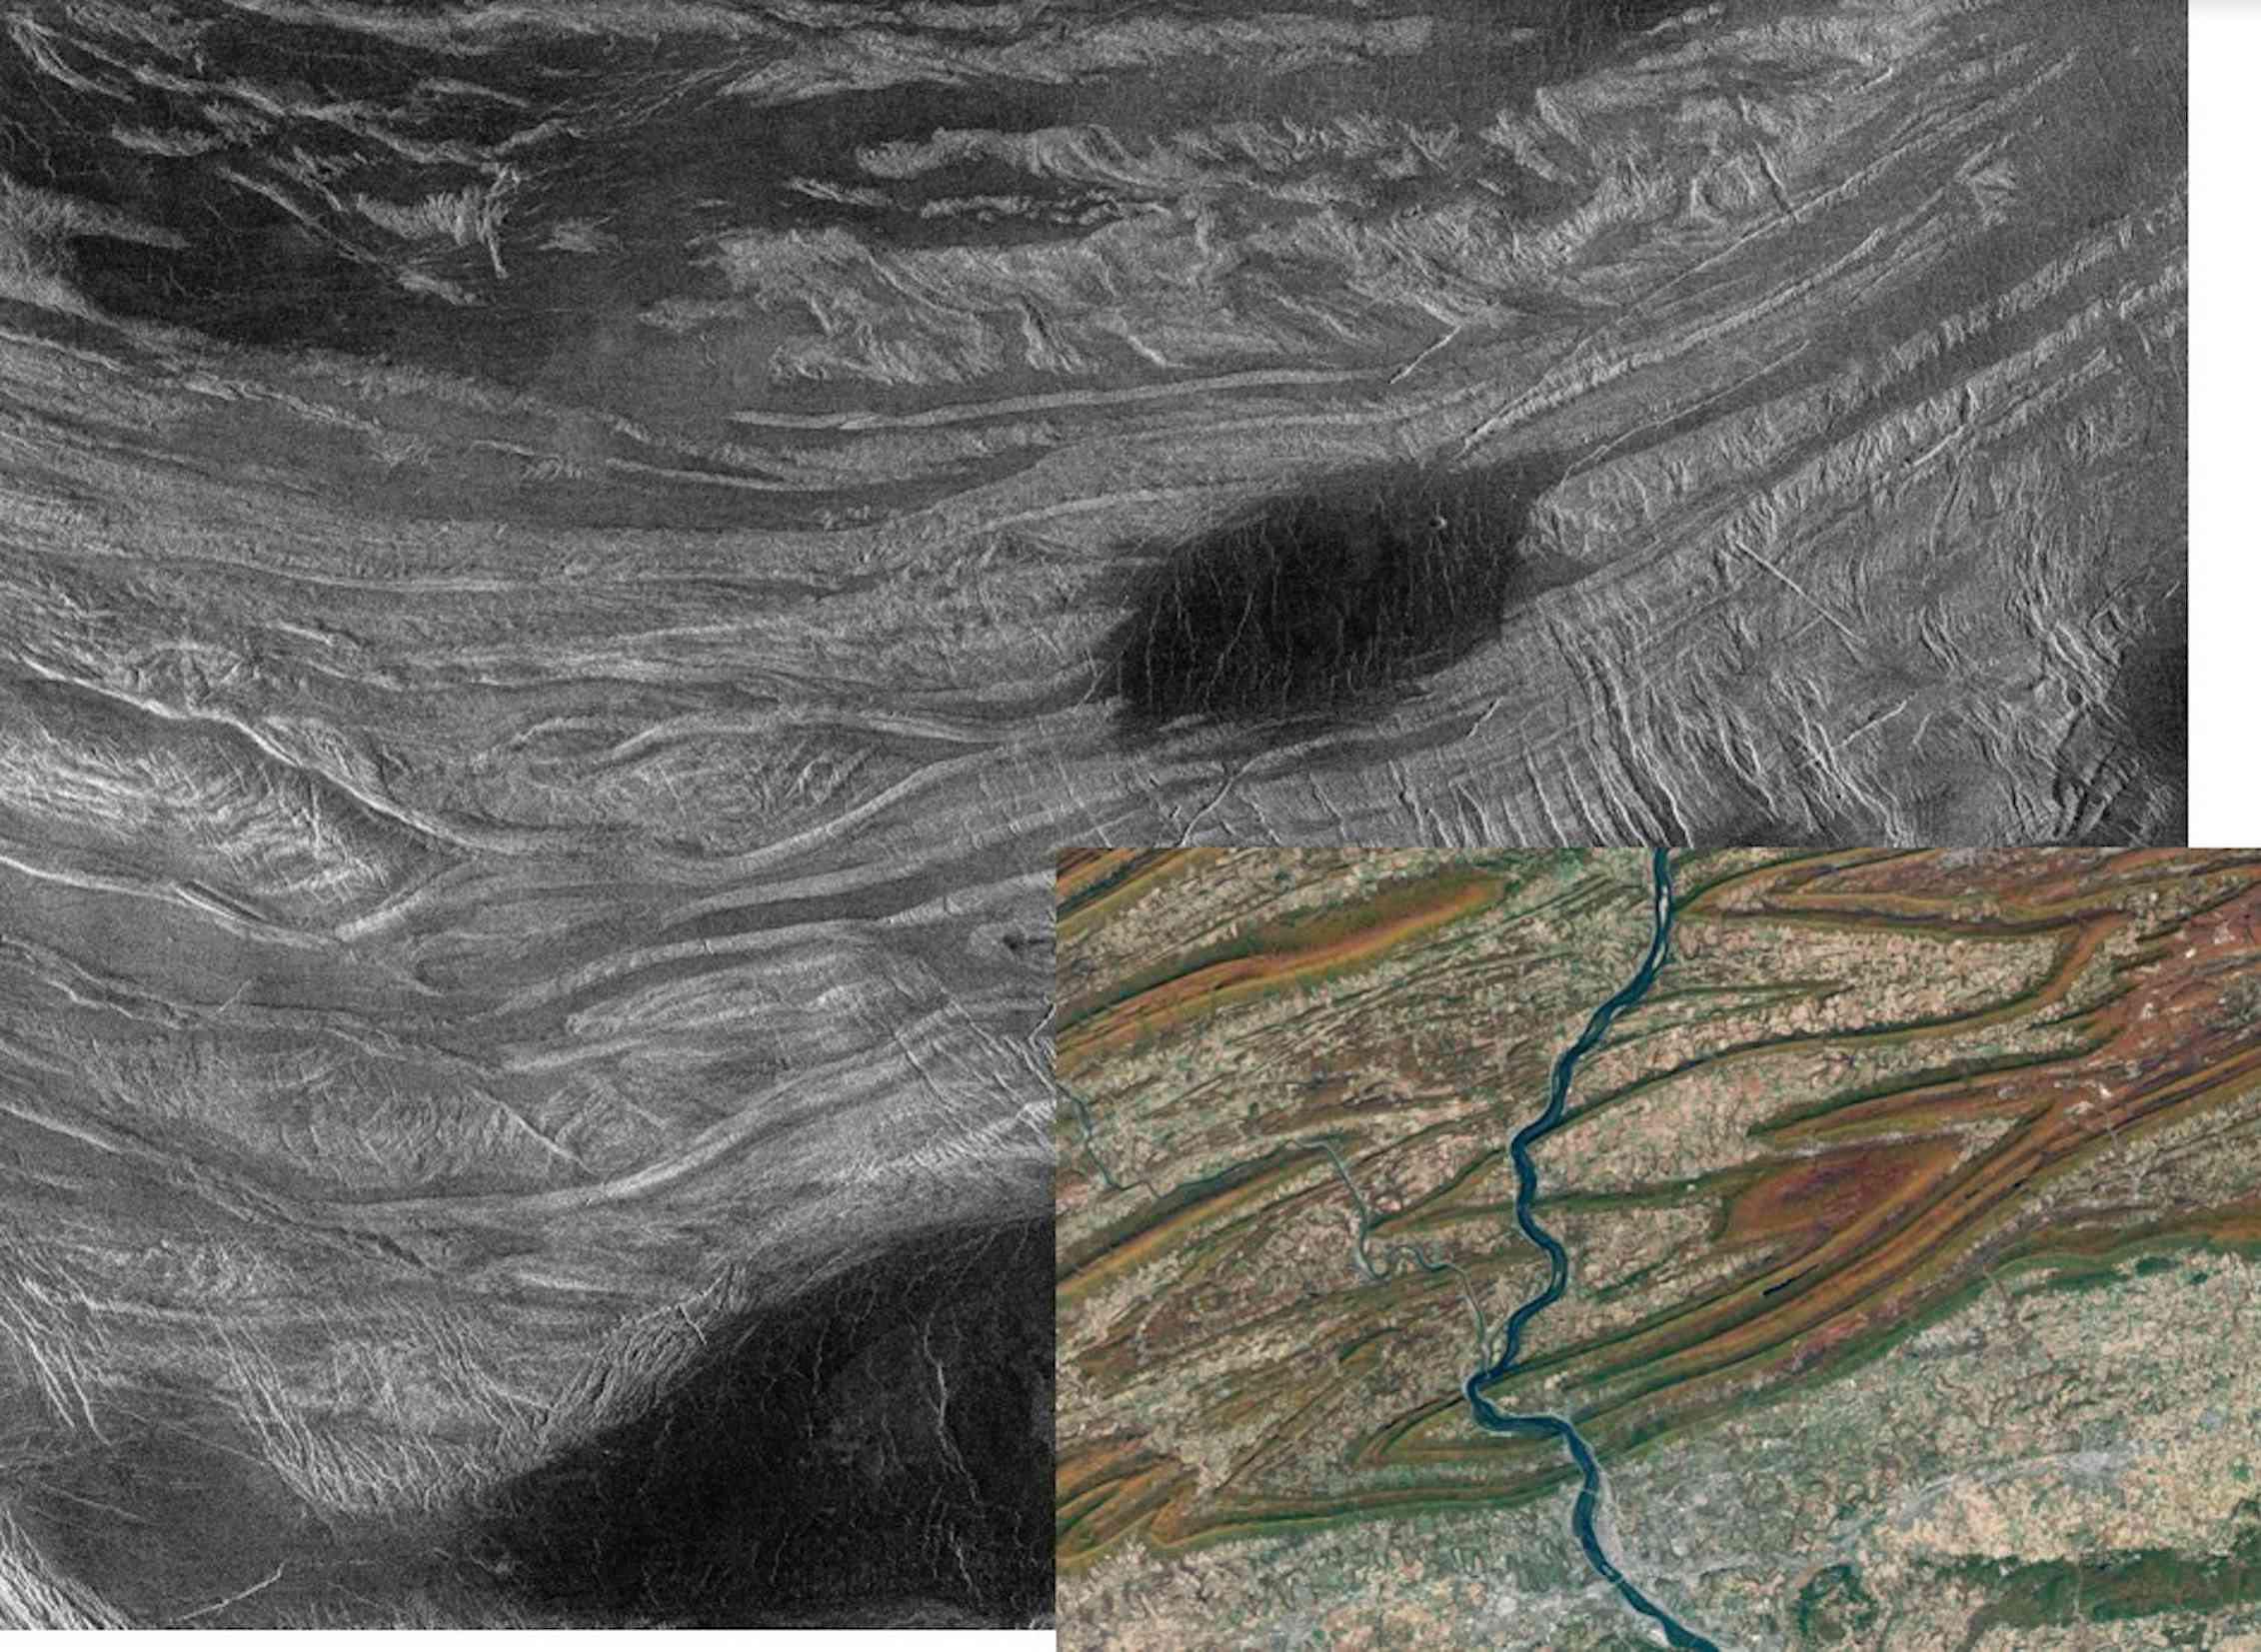 Image of the fold mountains on Venus.